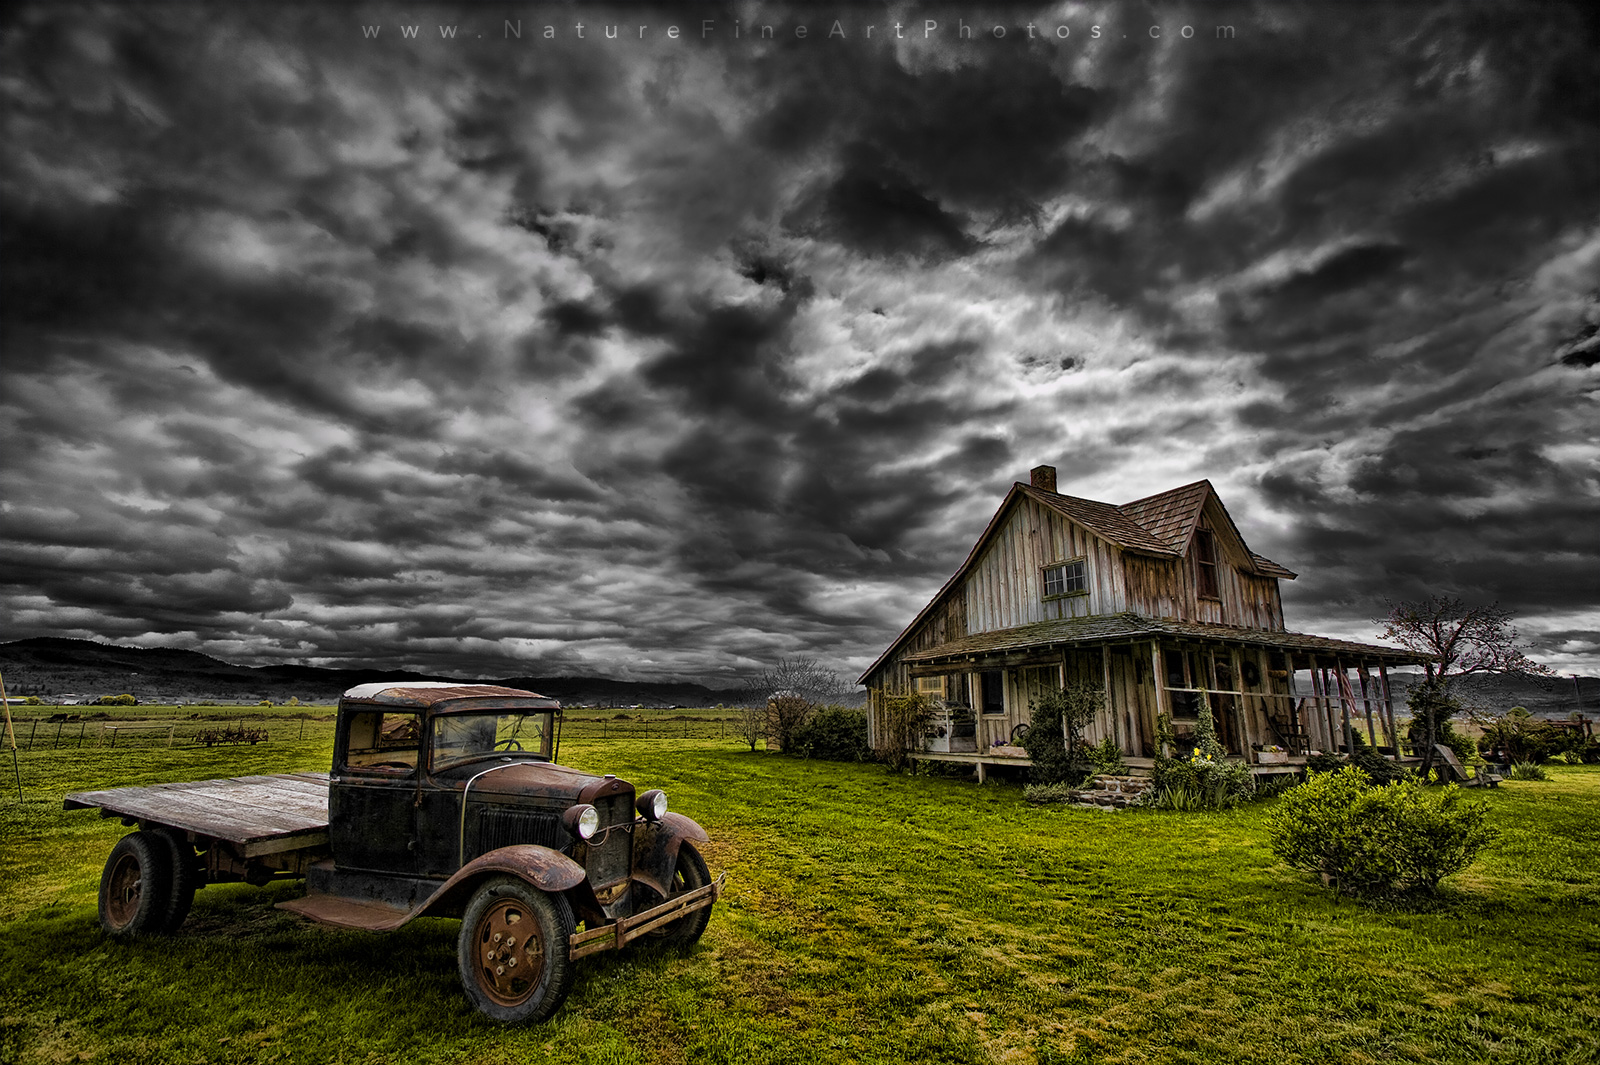 The Old Historic House Photo | Nature Photos